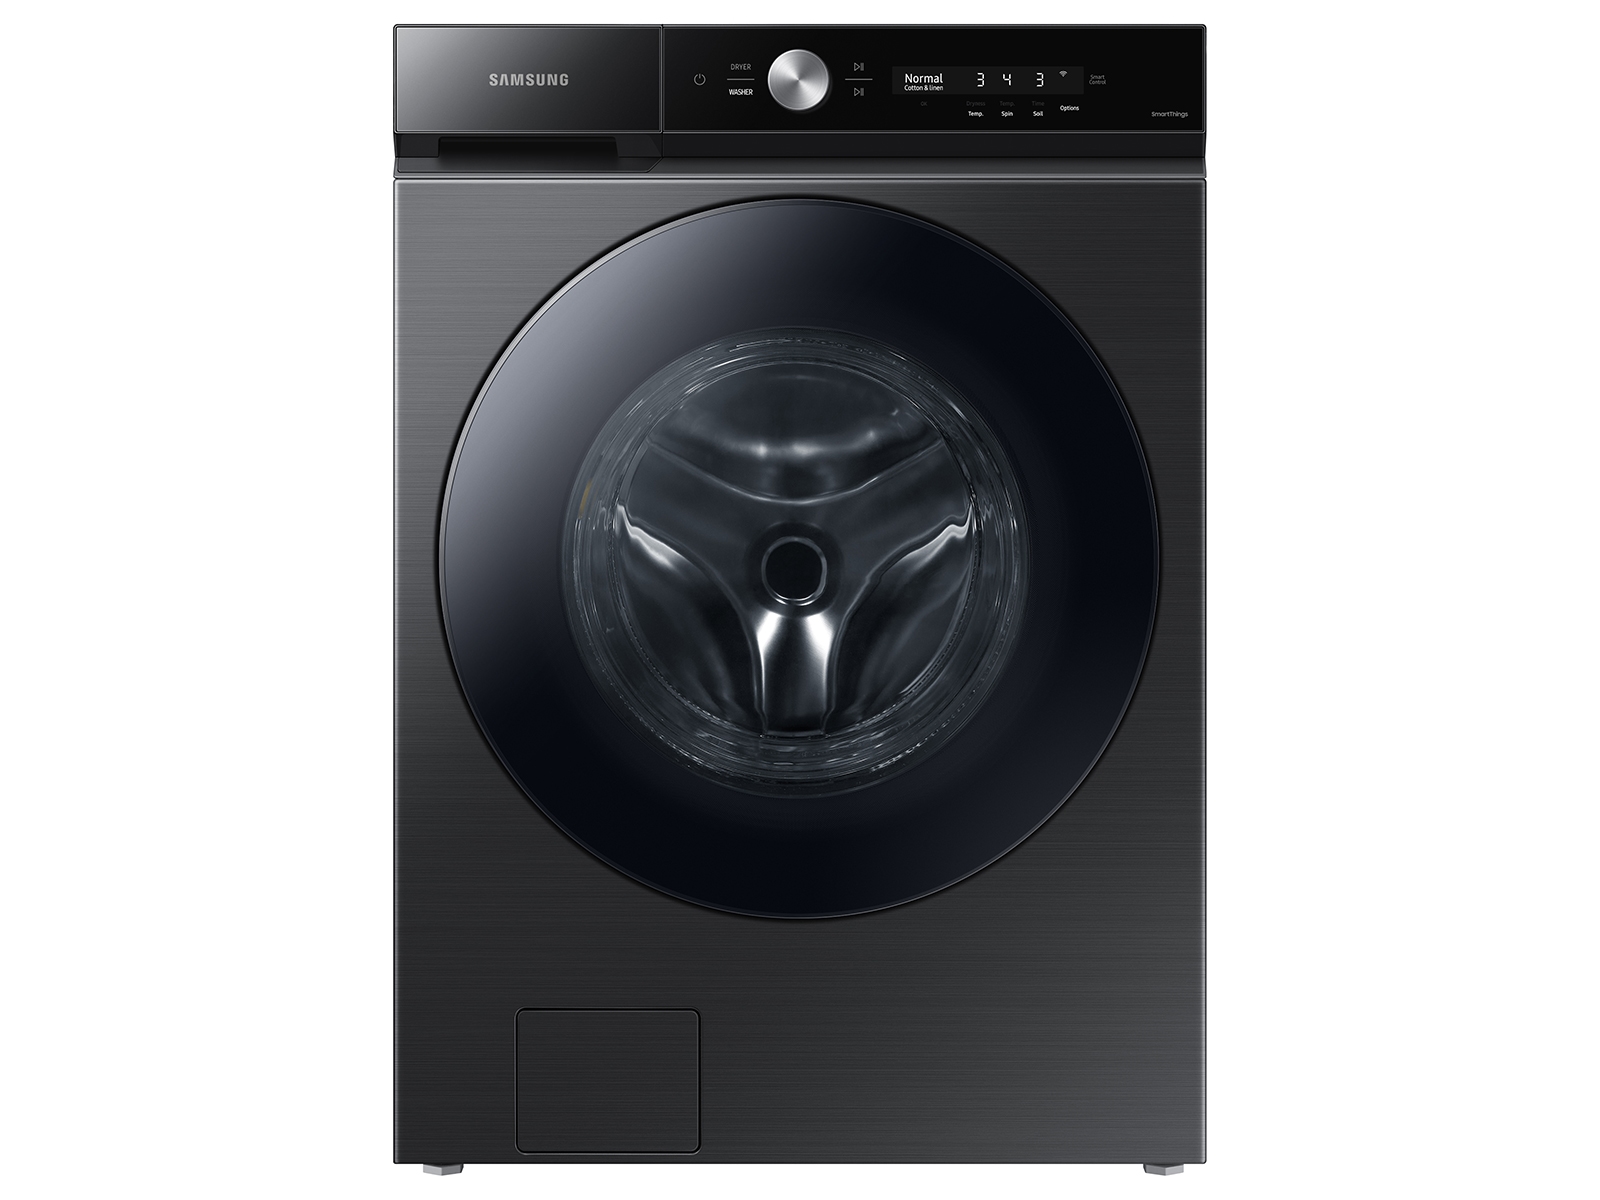 Photos - Washing Machine Samsung Bespoke 5.3 cu. ft. Ultra Capacity Front Load Washer with Super Sp 